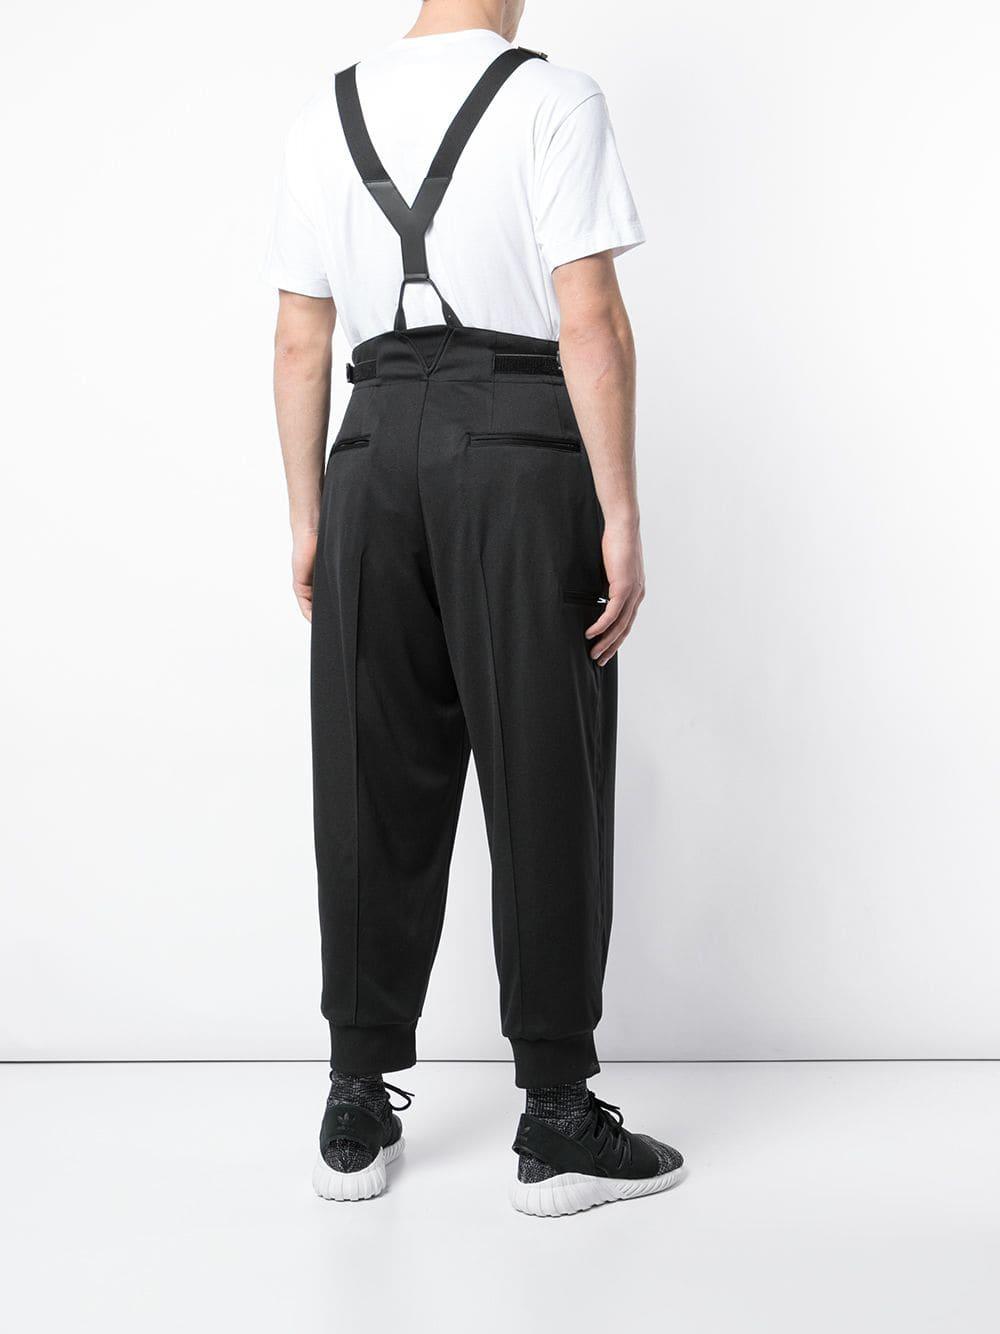 Y-3 Suspender Tapered Trousers in Black for Men - Lyst